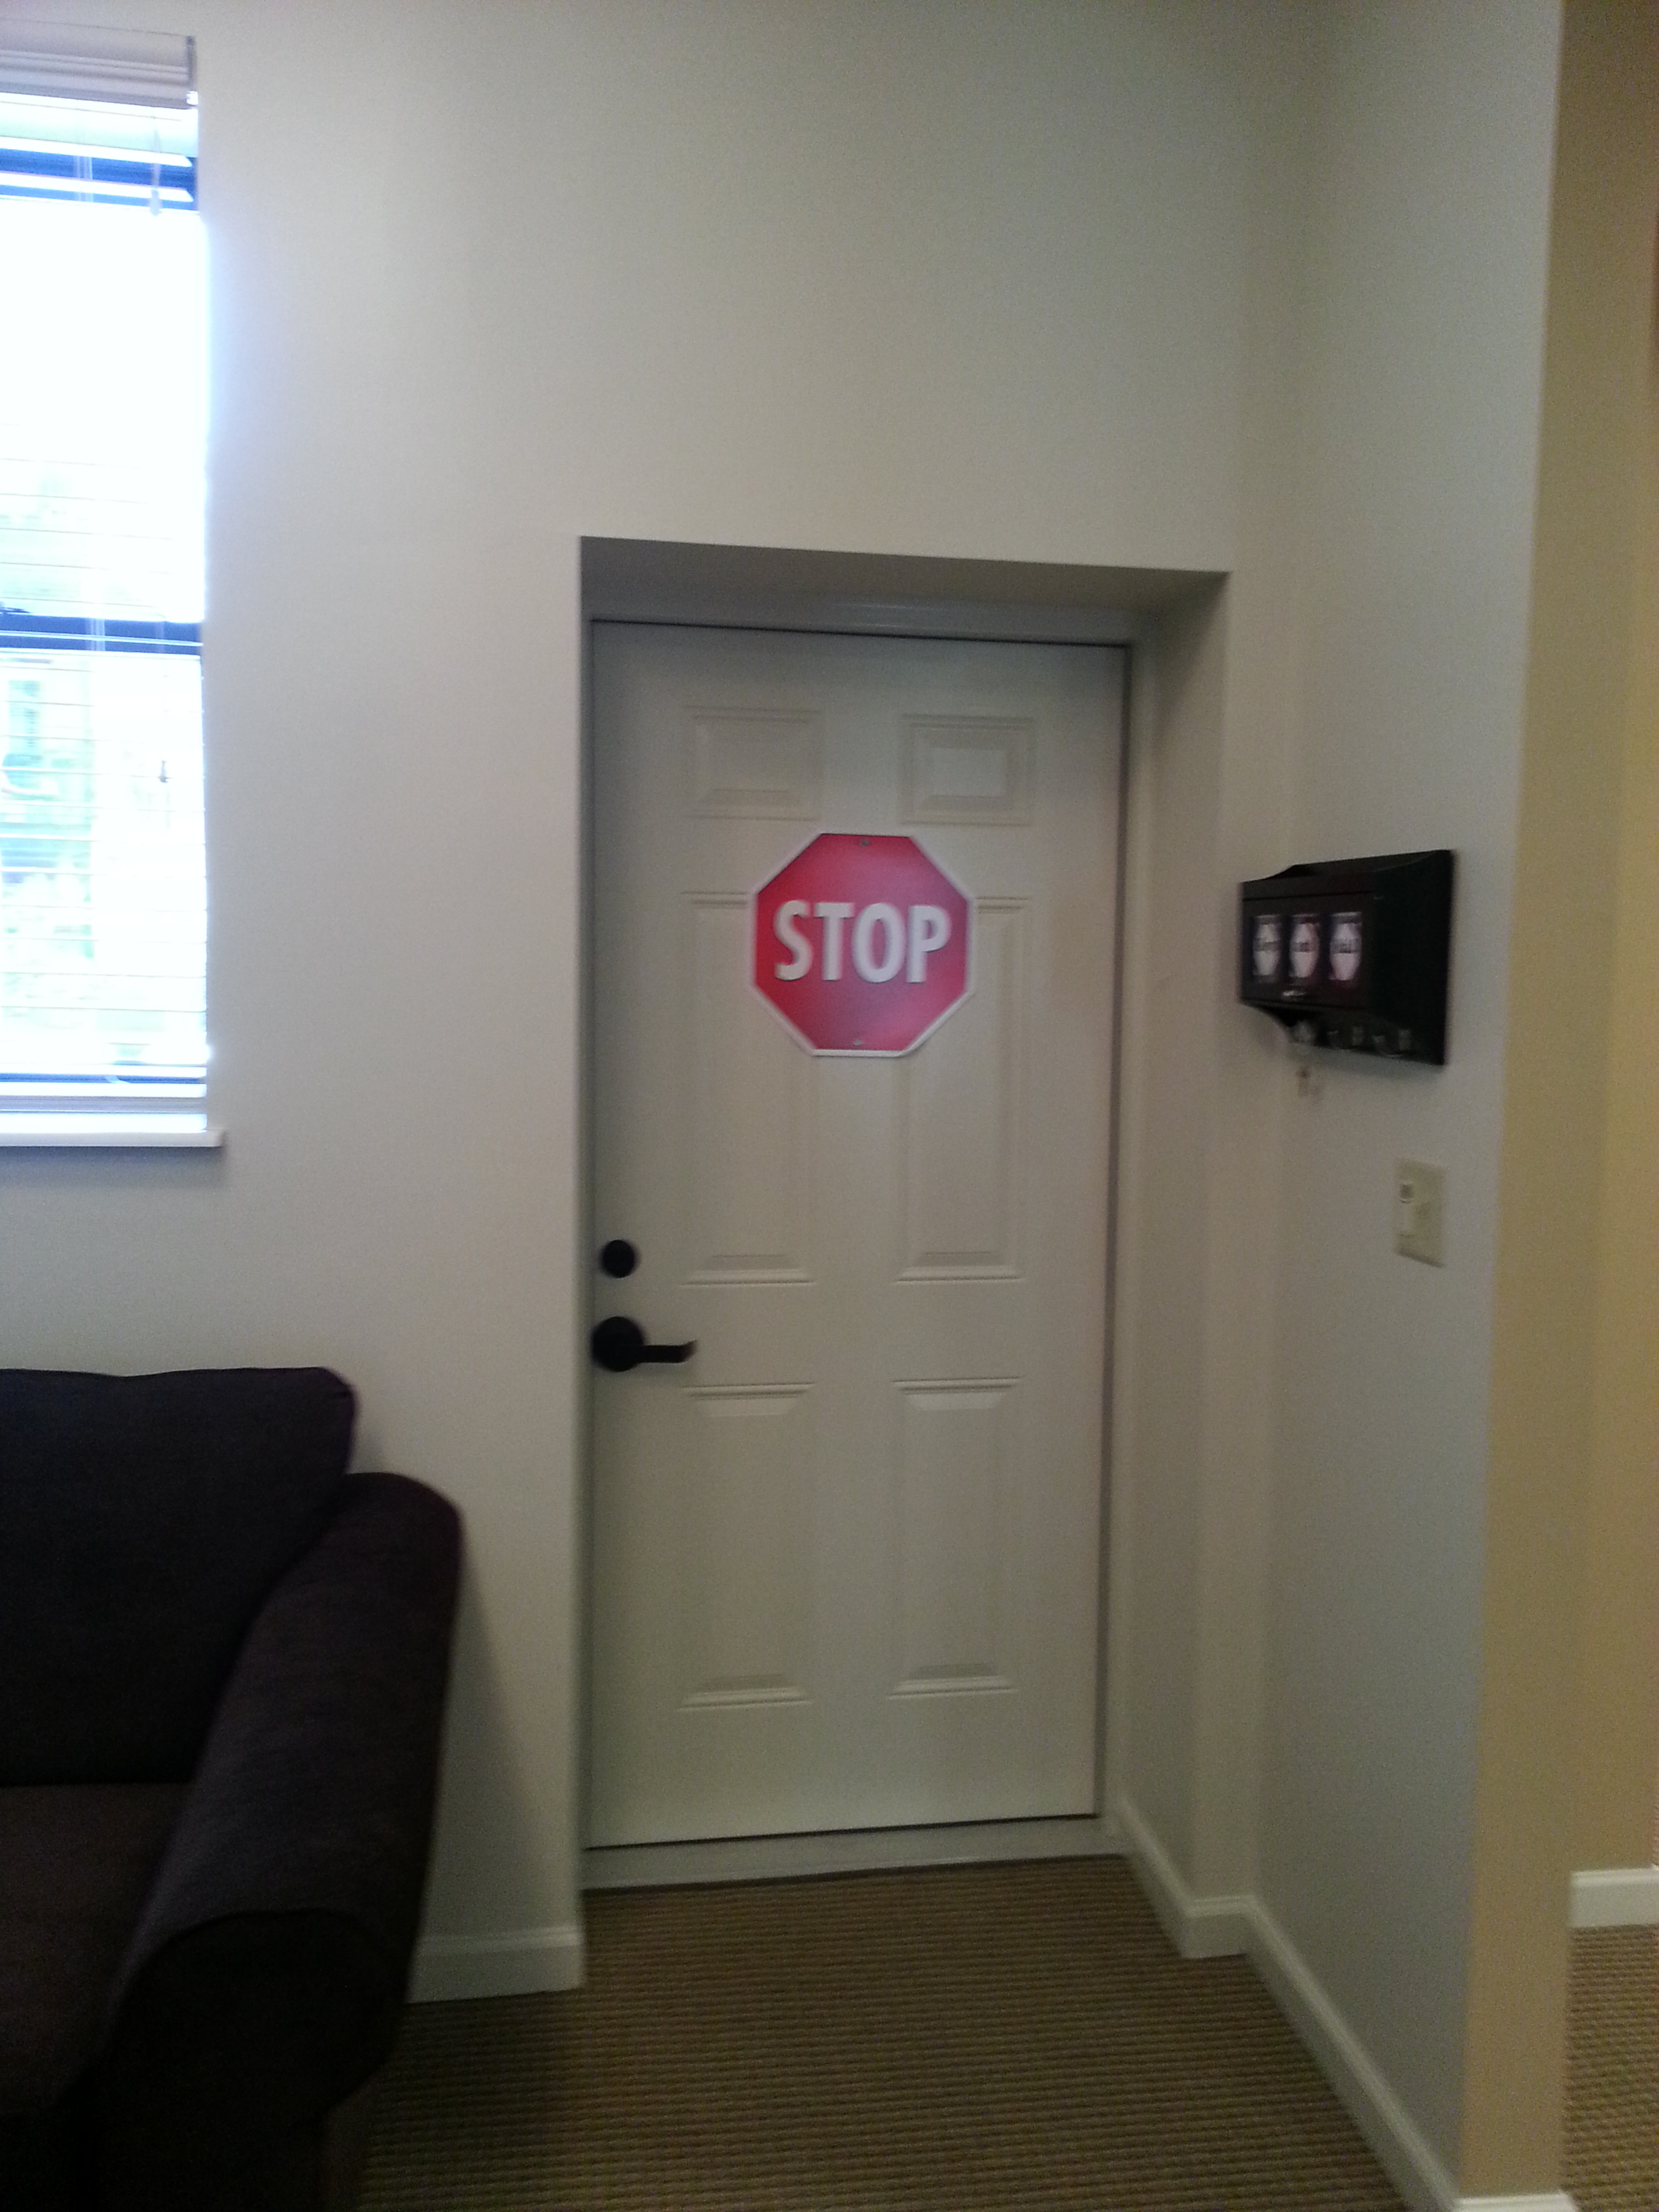 Memory Care home solutions 9 stop sign on door